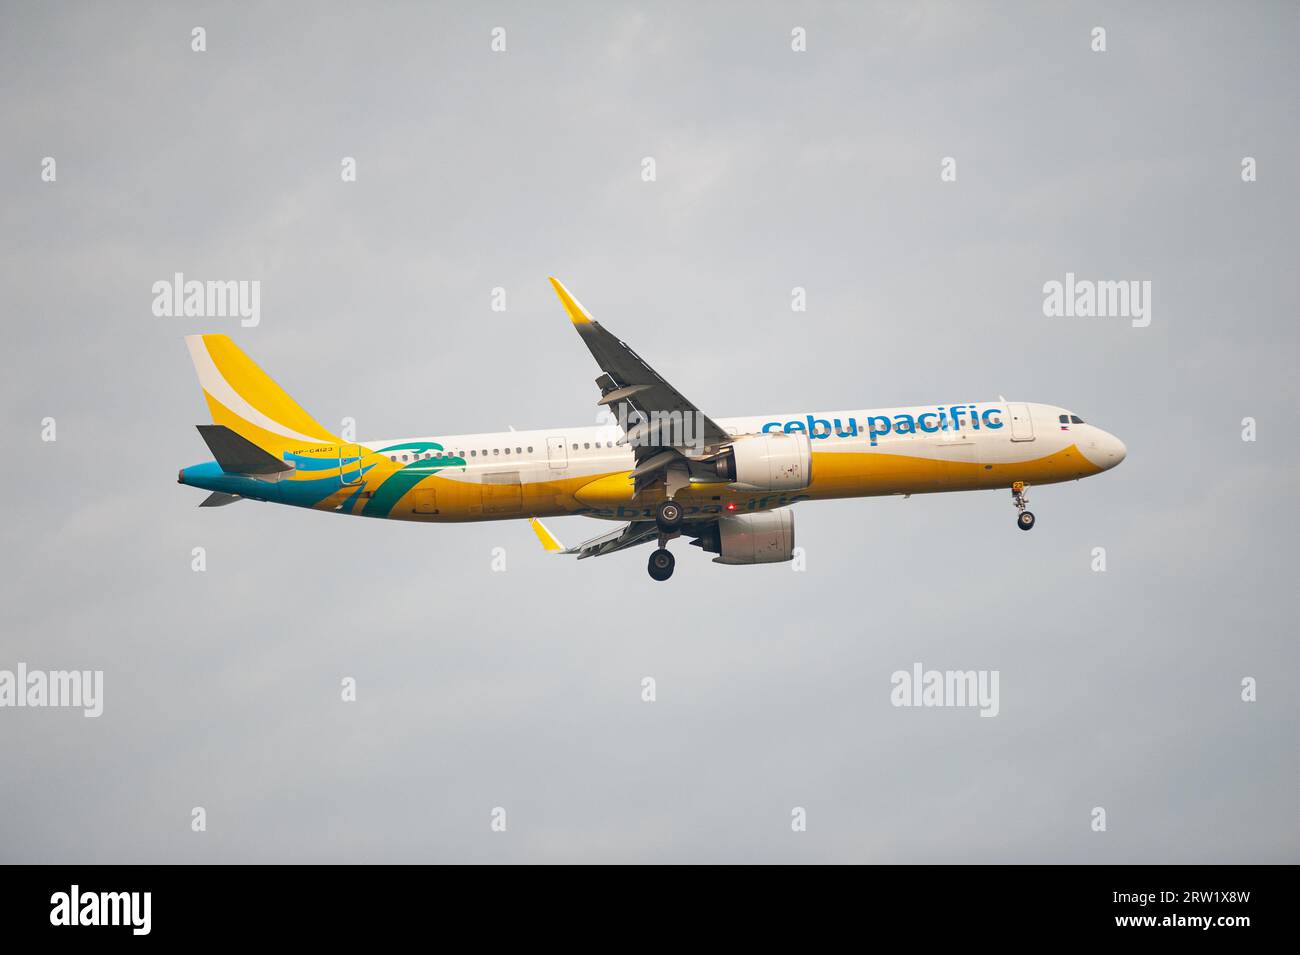 02.08.2023, Republic of Singapore, , Singapore - A passenger aircraft of the Philippine airline Cebu Pacific Air of type Airbus A321 Neo with registra Stock Photo